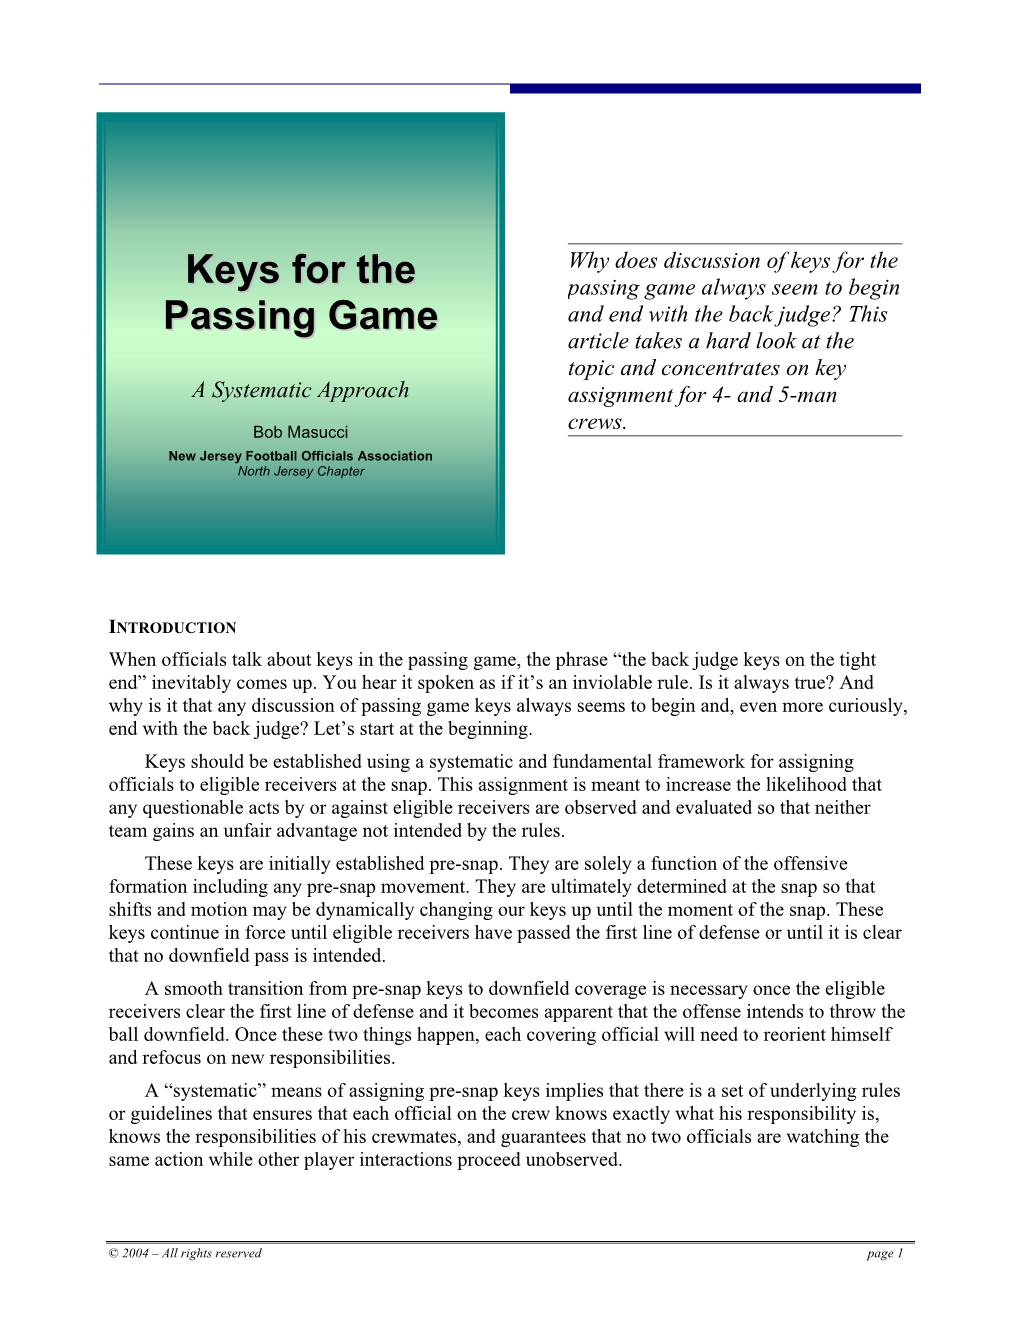 Keys for the Passing Game